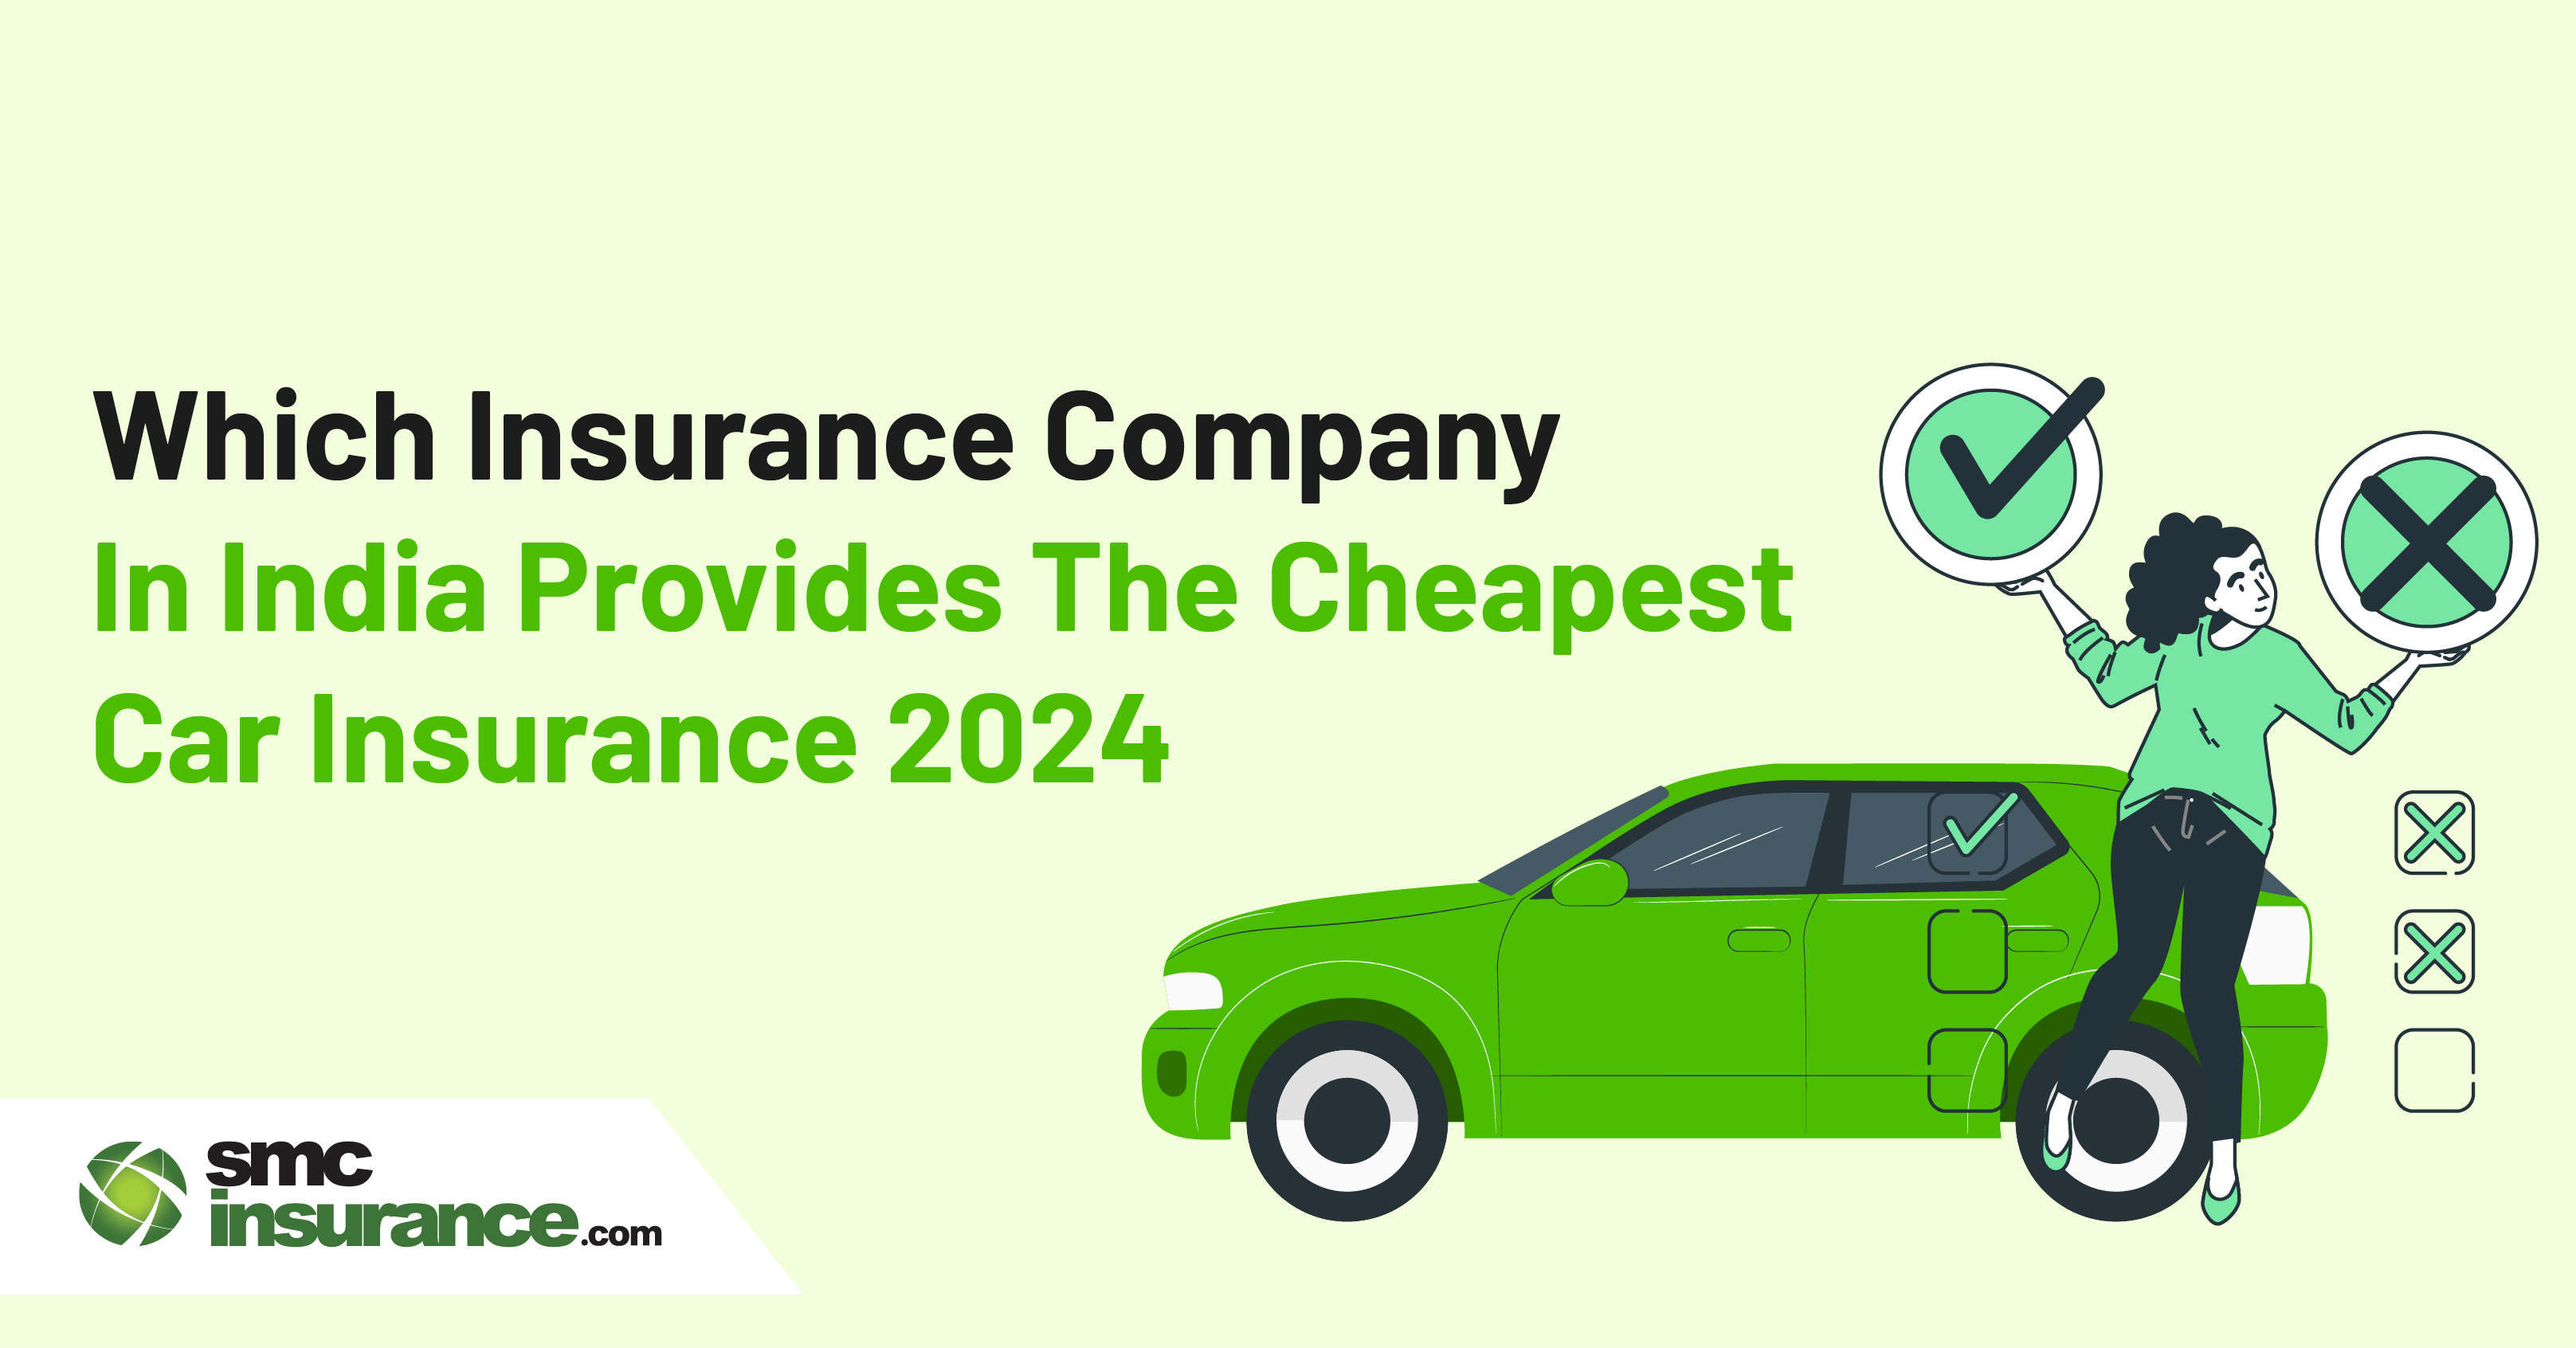 Which Insurance Company In India Provides The Cheapest Car Insurance 2024?